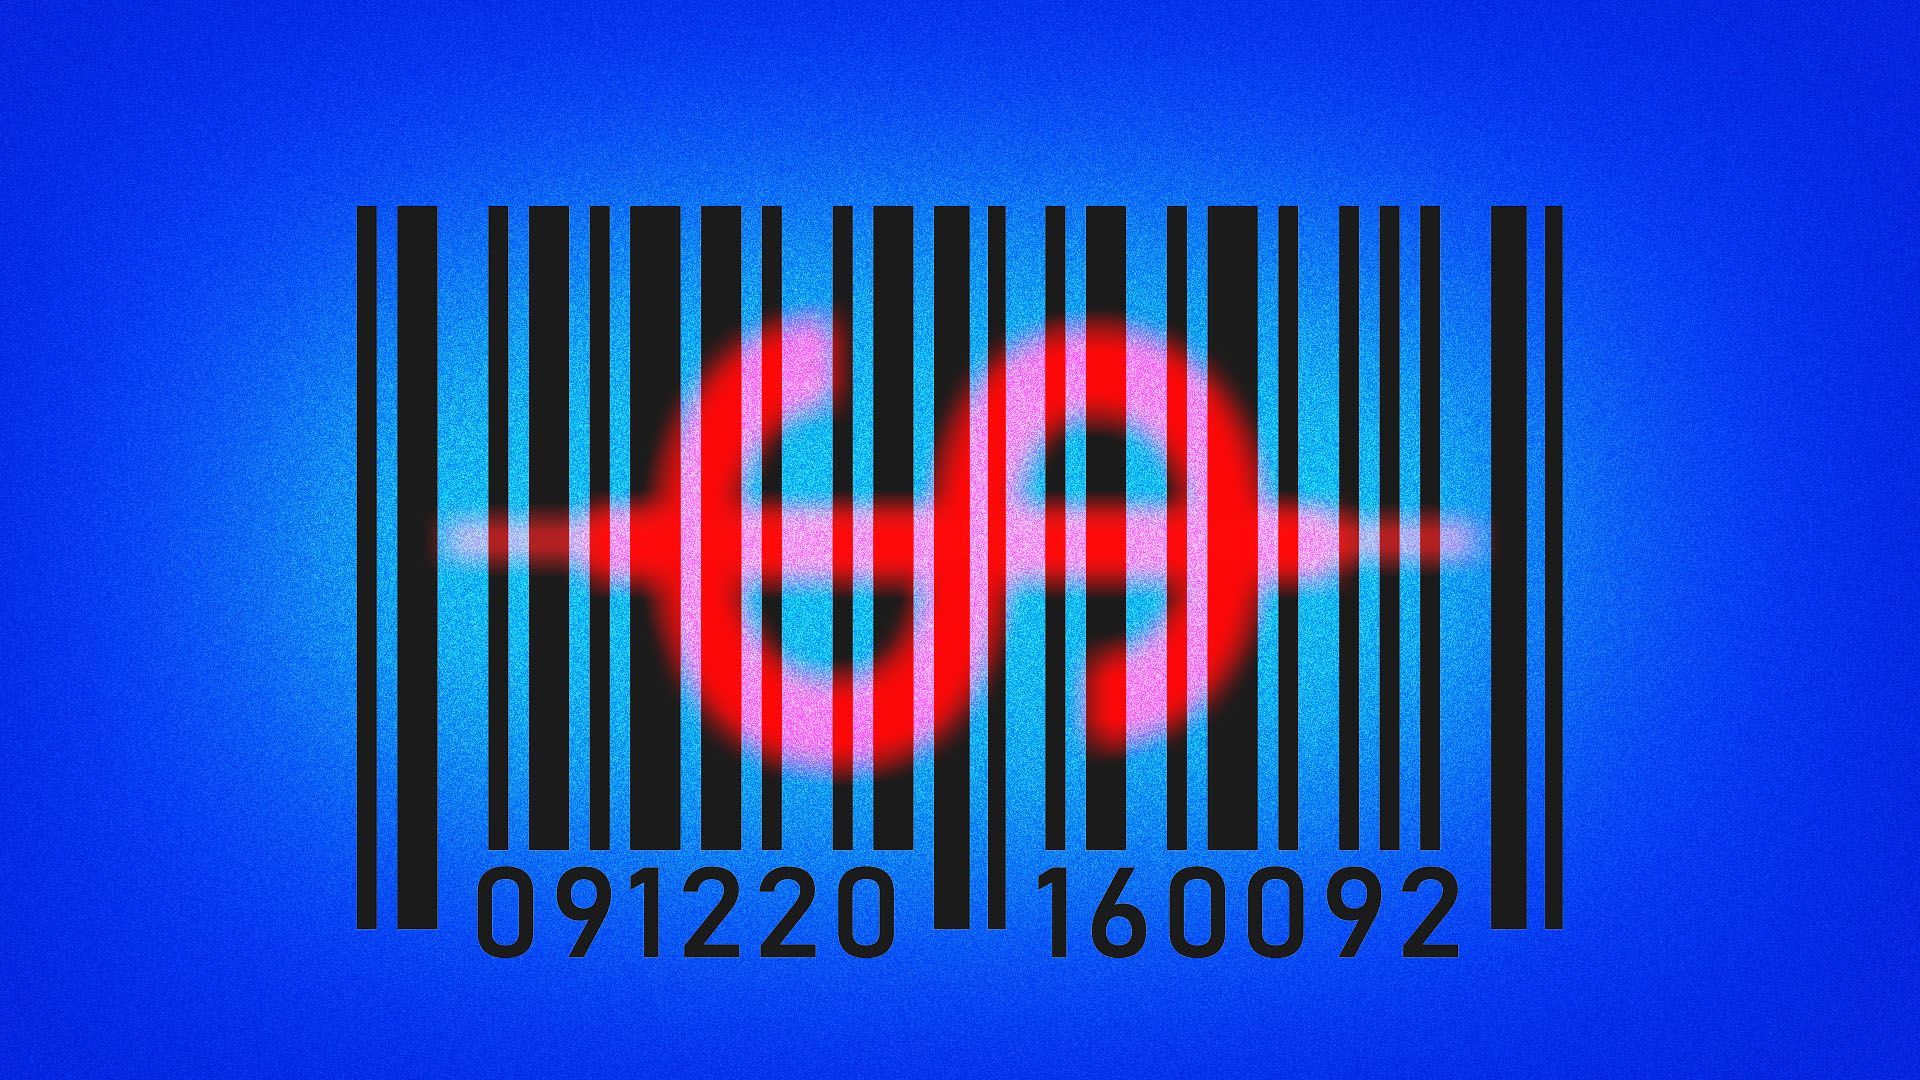 Illustration of a barcode with a dollar sign shaped laser on it